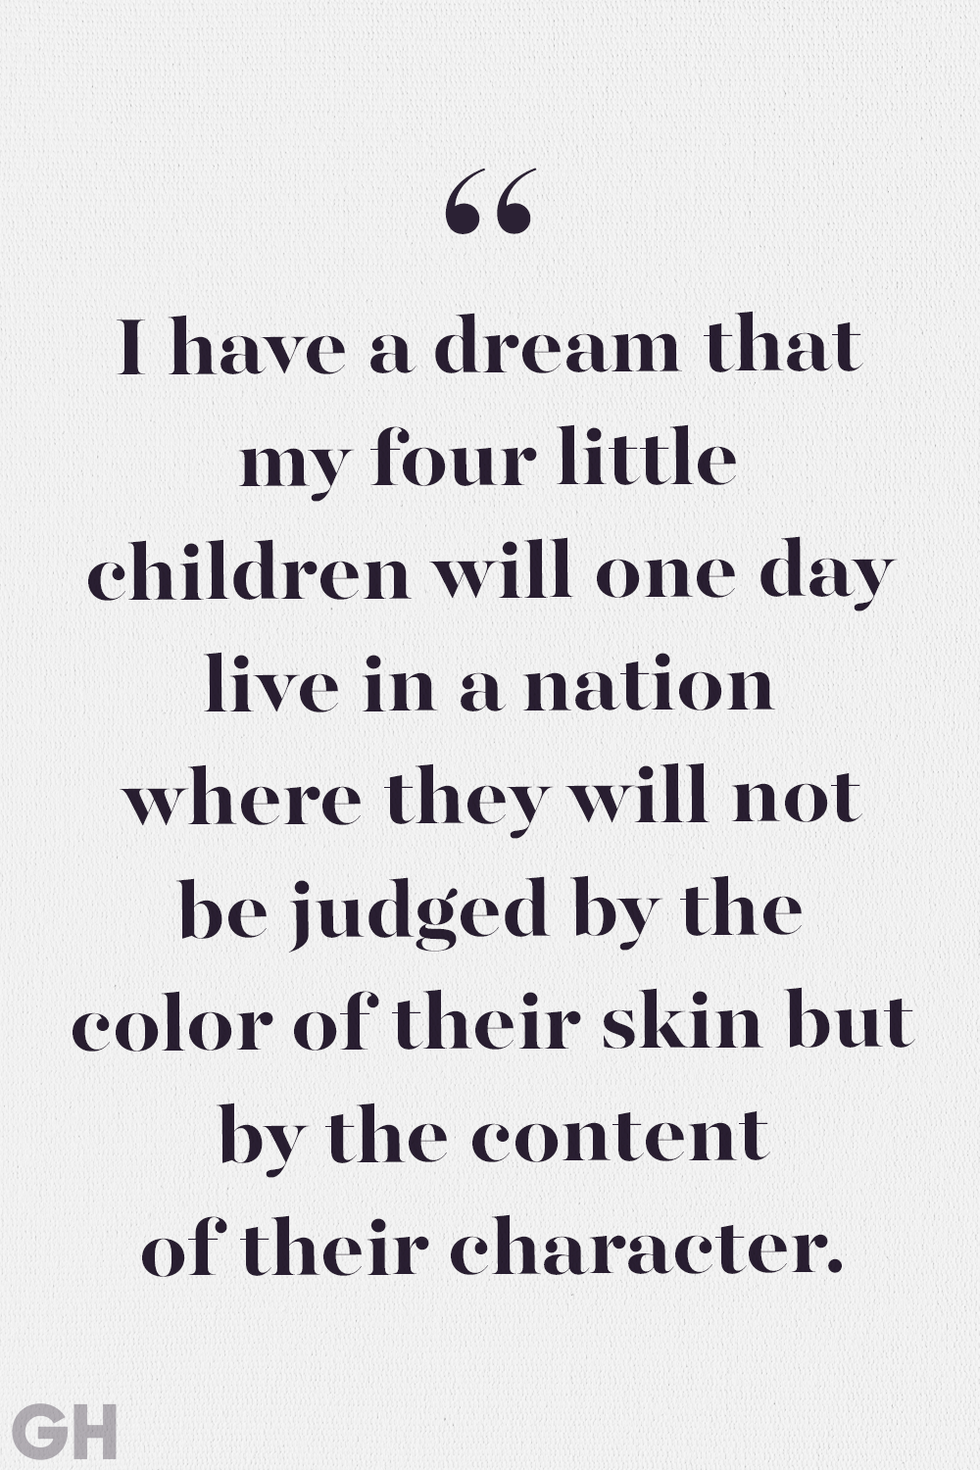 quote by martin luther king jr